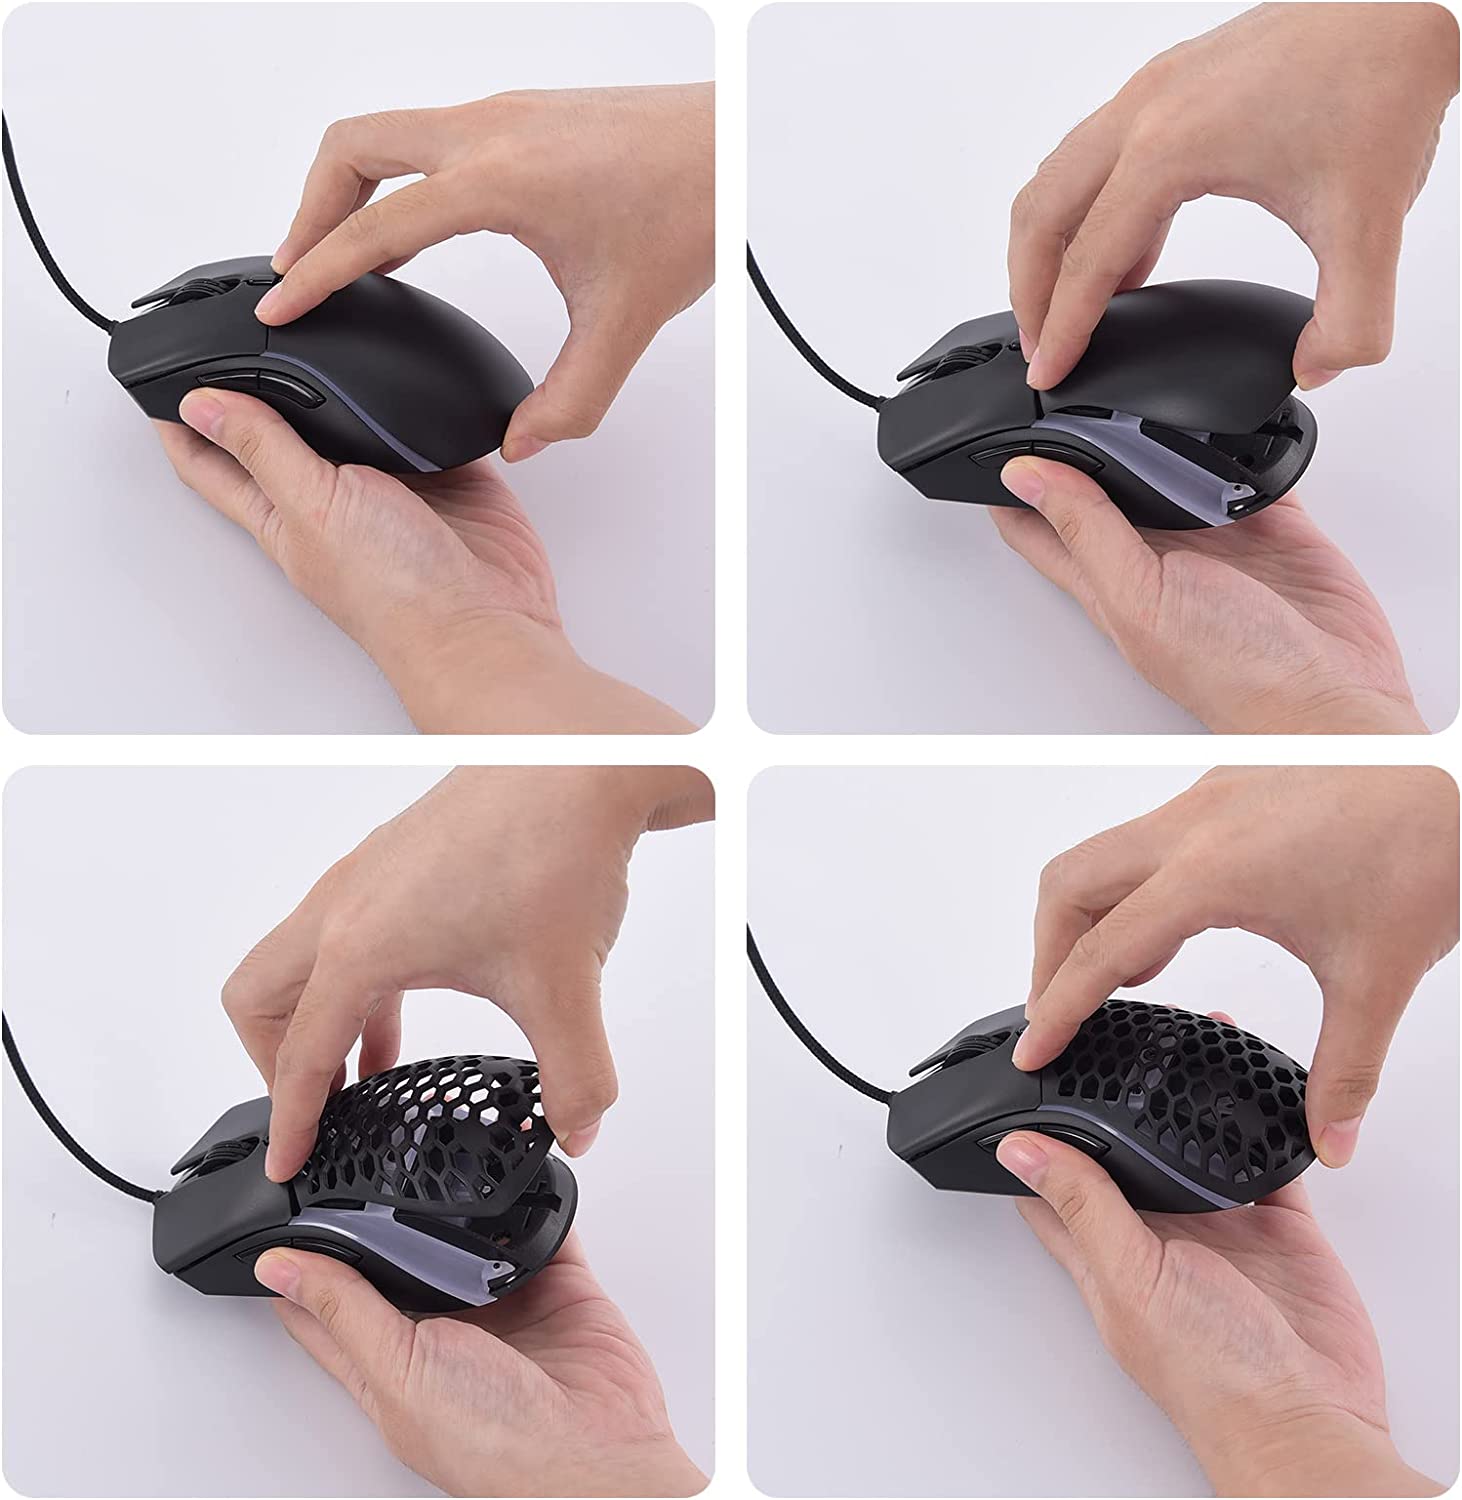 Y-FRUITFUL-Game-Mouse-Silent-RGB-2-in-1-Wired-Gaming-mouse-Replaceable-Housing-Ergonomic-Gamer-Mouse-6-Button-12000DPI-Computer-Mice-For-PC-Labtop-65